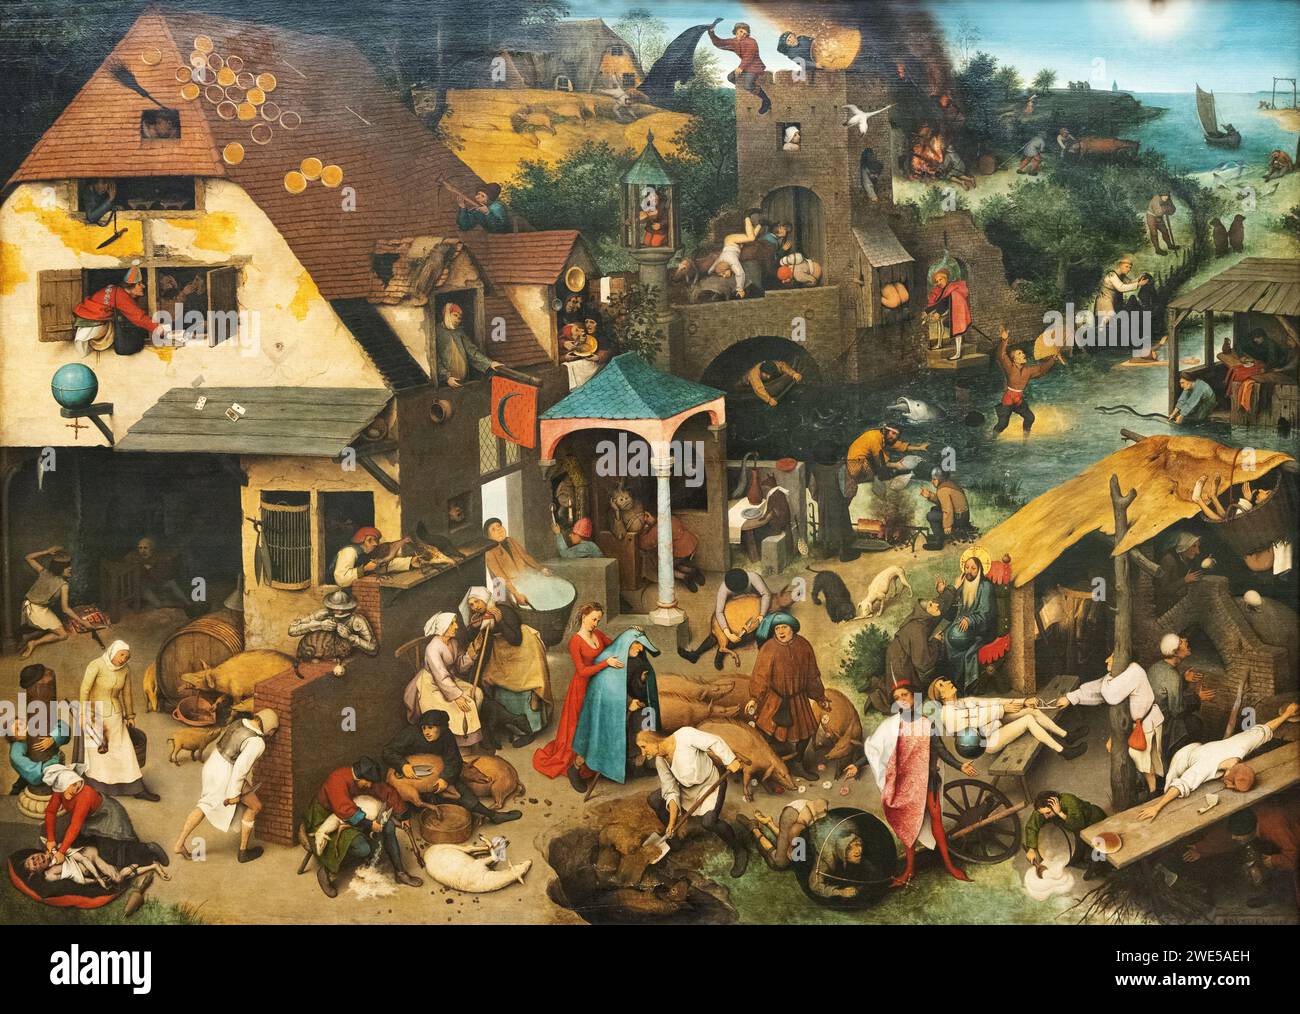 Pieter Bruegel the Elder painting; 'Netherlandish Proverbs', 1559, aka 'Dutch proverbs'. Over a hundred dutch proverbs illustrated by peasant life. Stock Photo